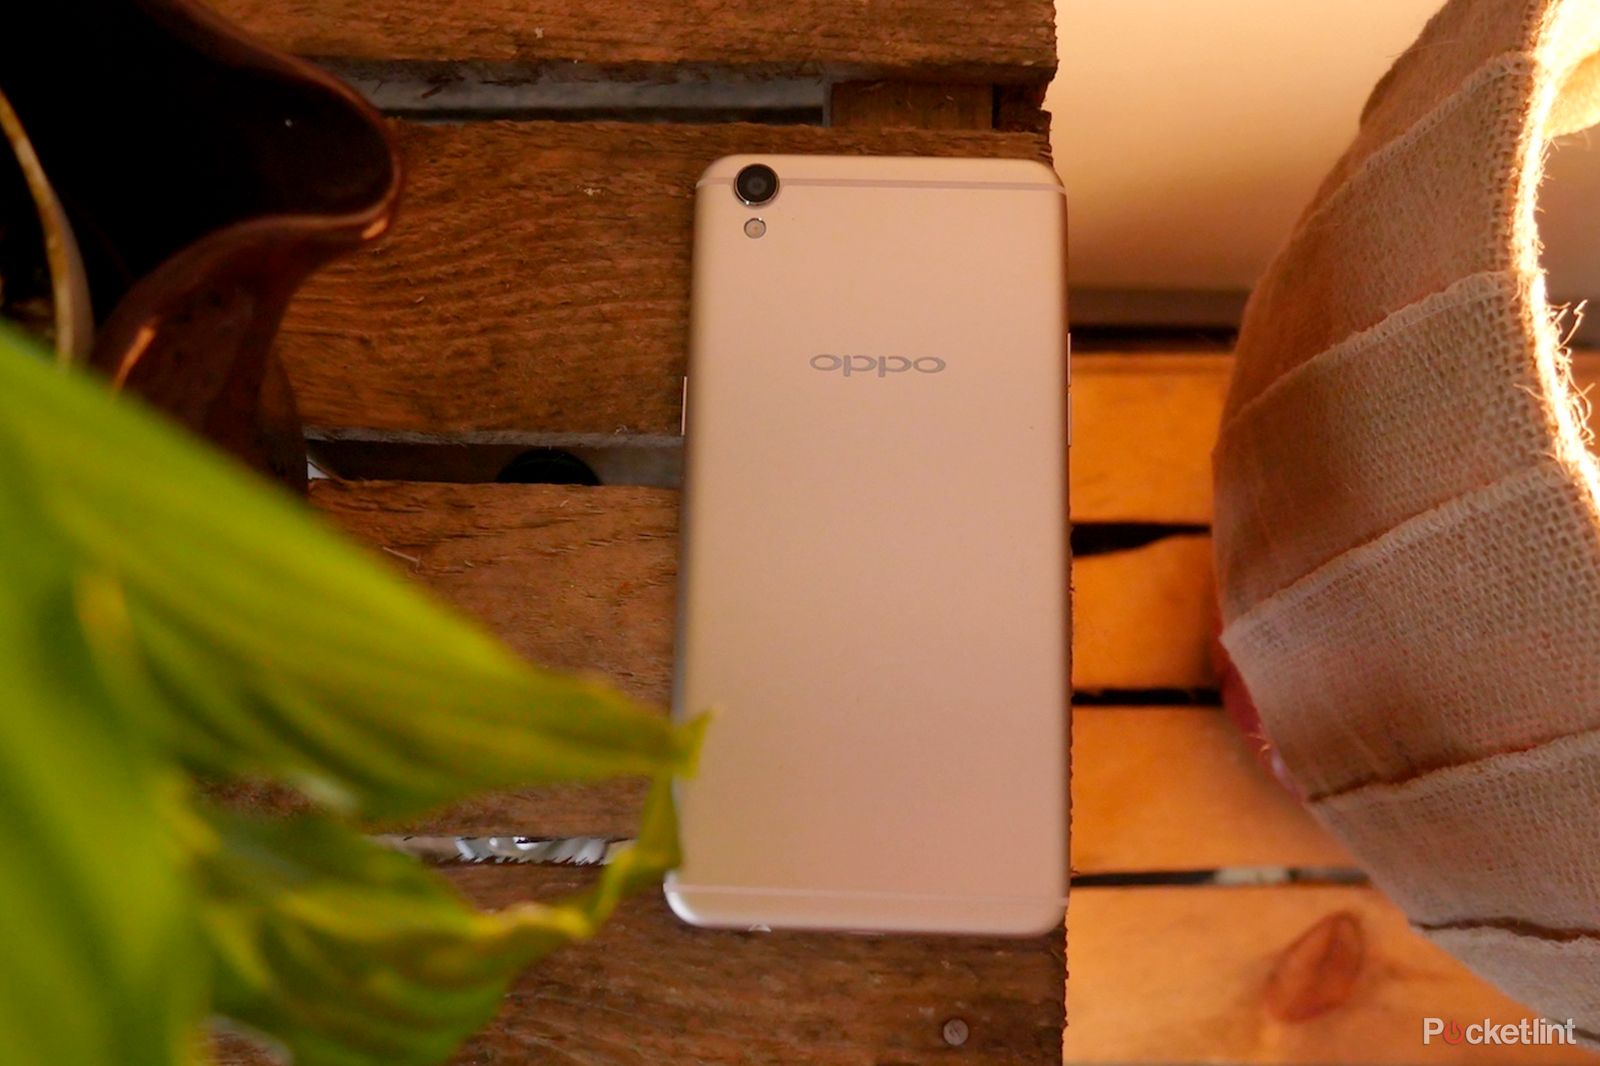 oppo f1 plus review image 7